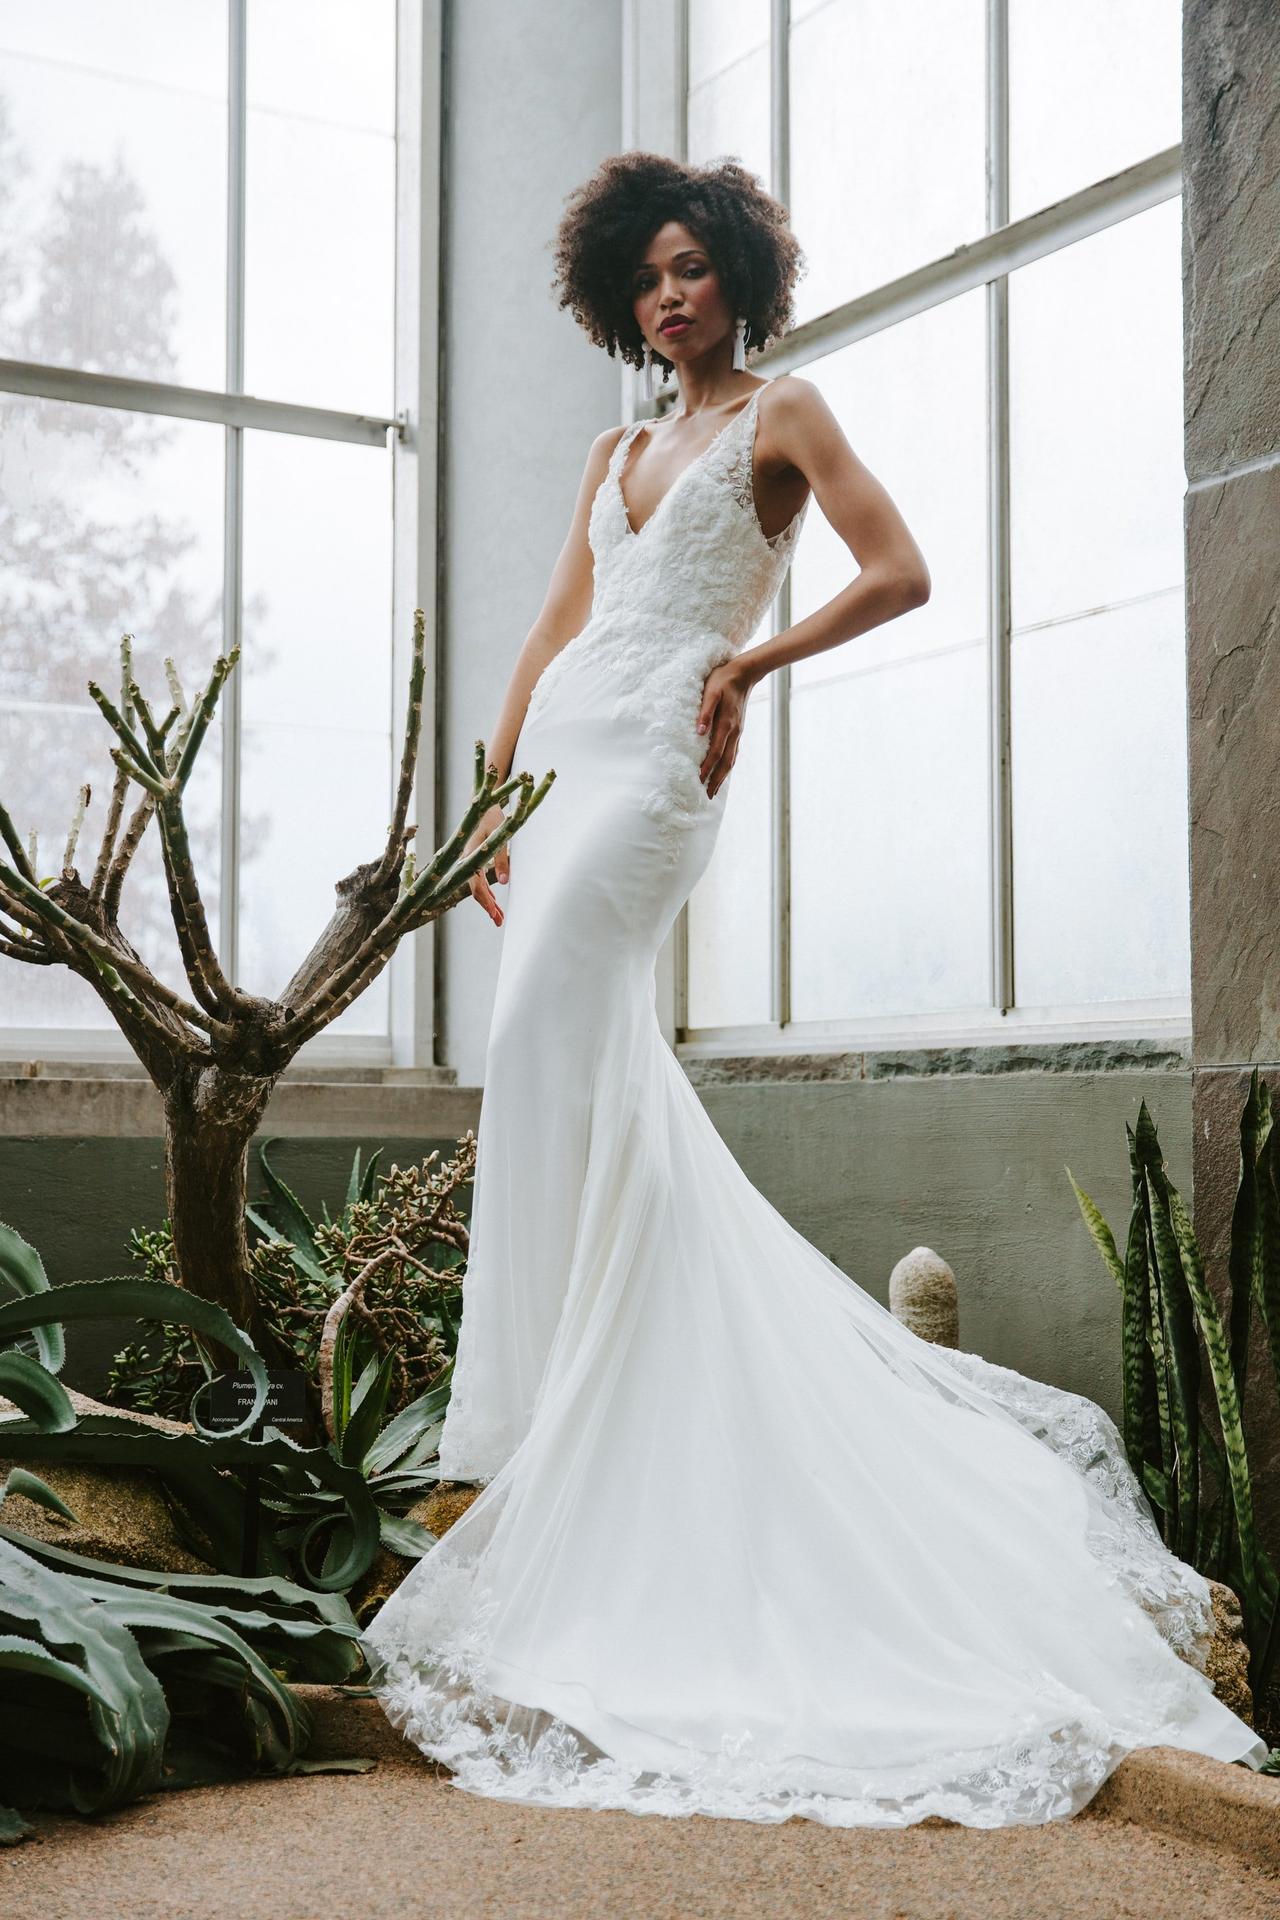 The 10 Best Wedding Dress Alterations Near Me (Free Quotes)